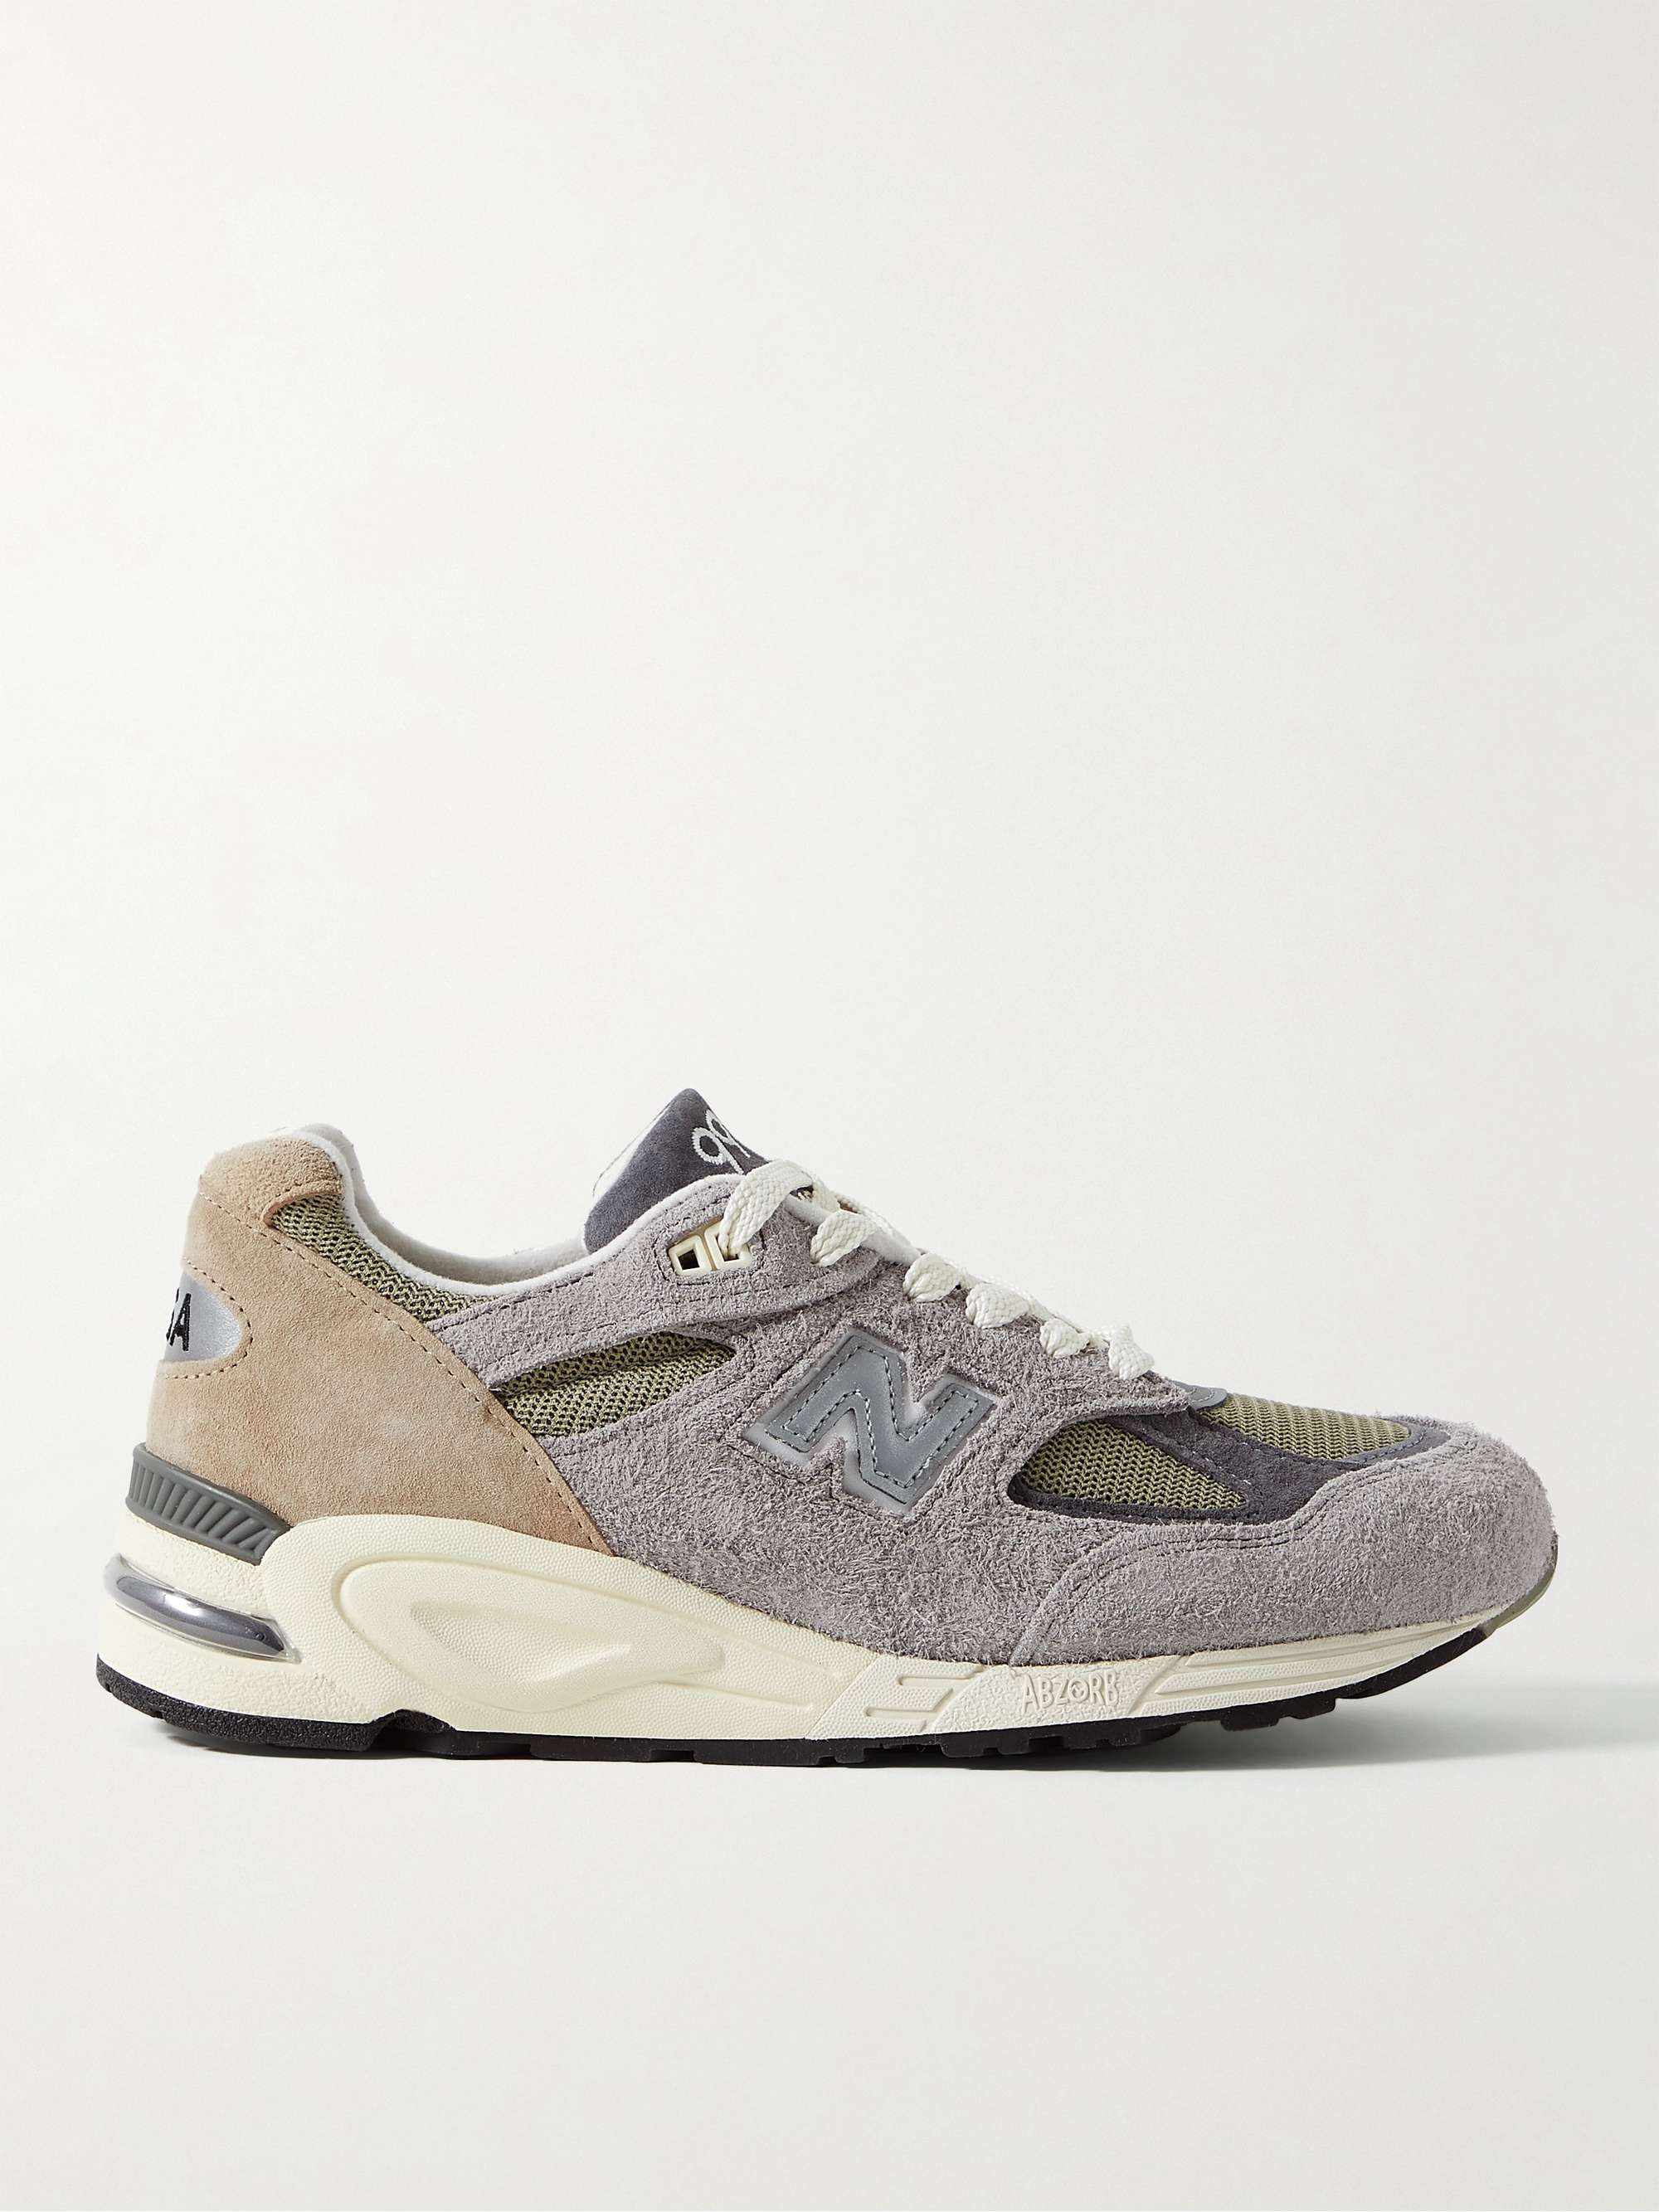 NEW BALANCE M990v2 Suede and Mesh Sneakers